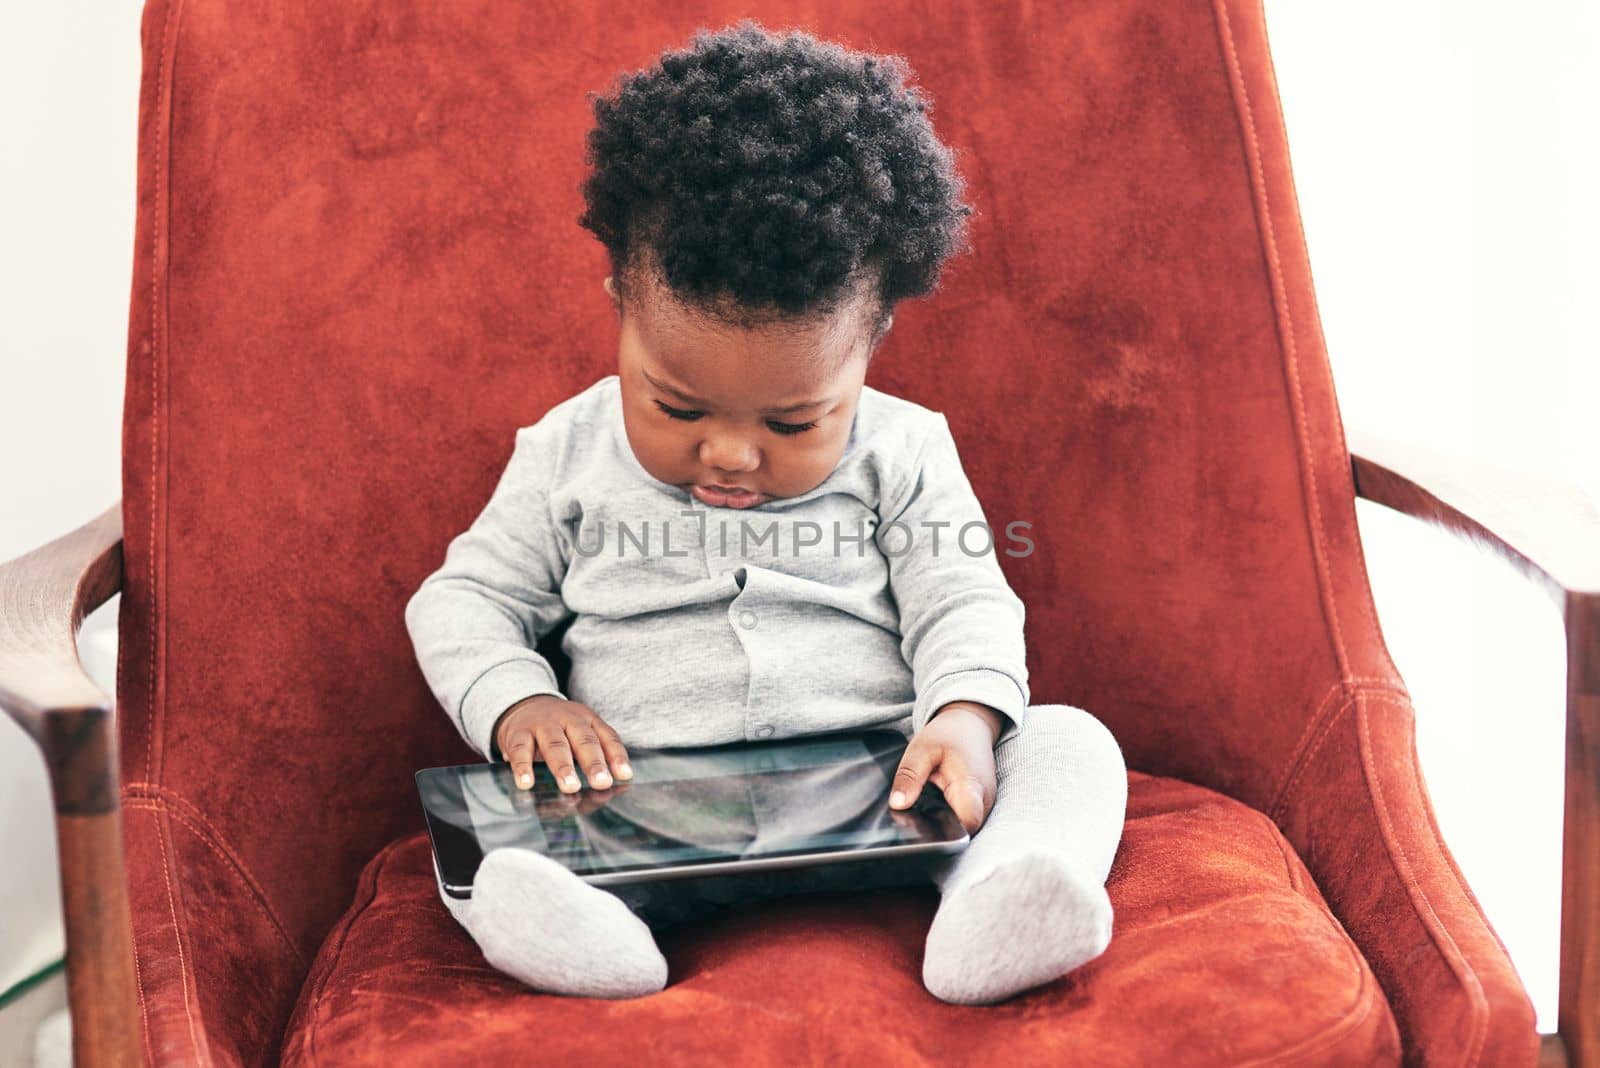 Hes a curious little one. a little baby boy sitting in a chair holding a digital tablet. by YuriArcurs